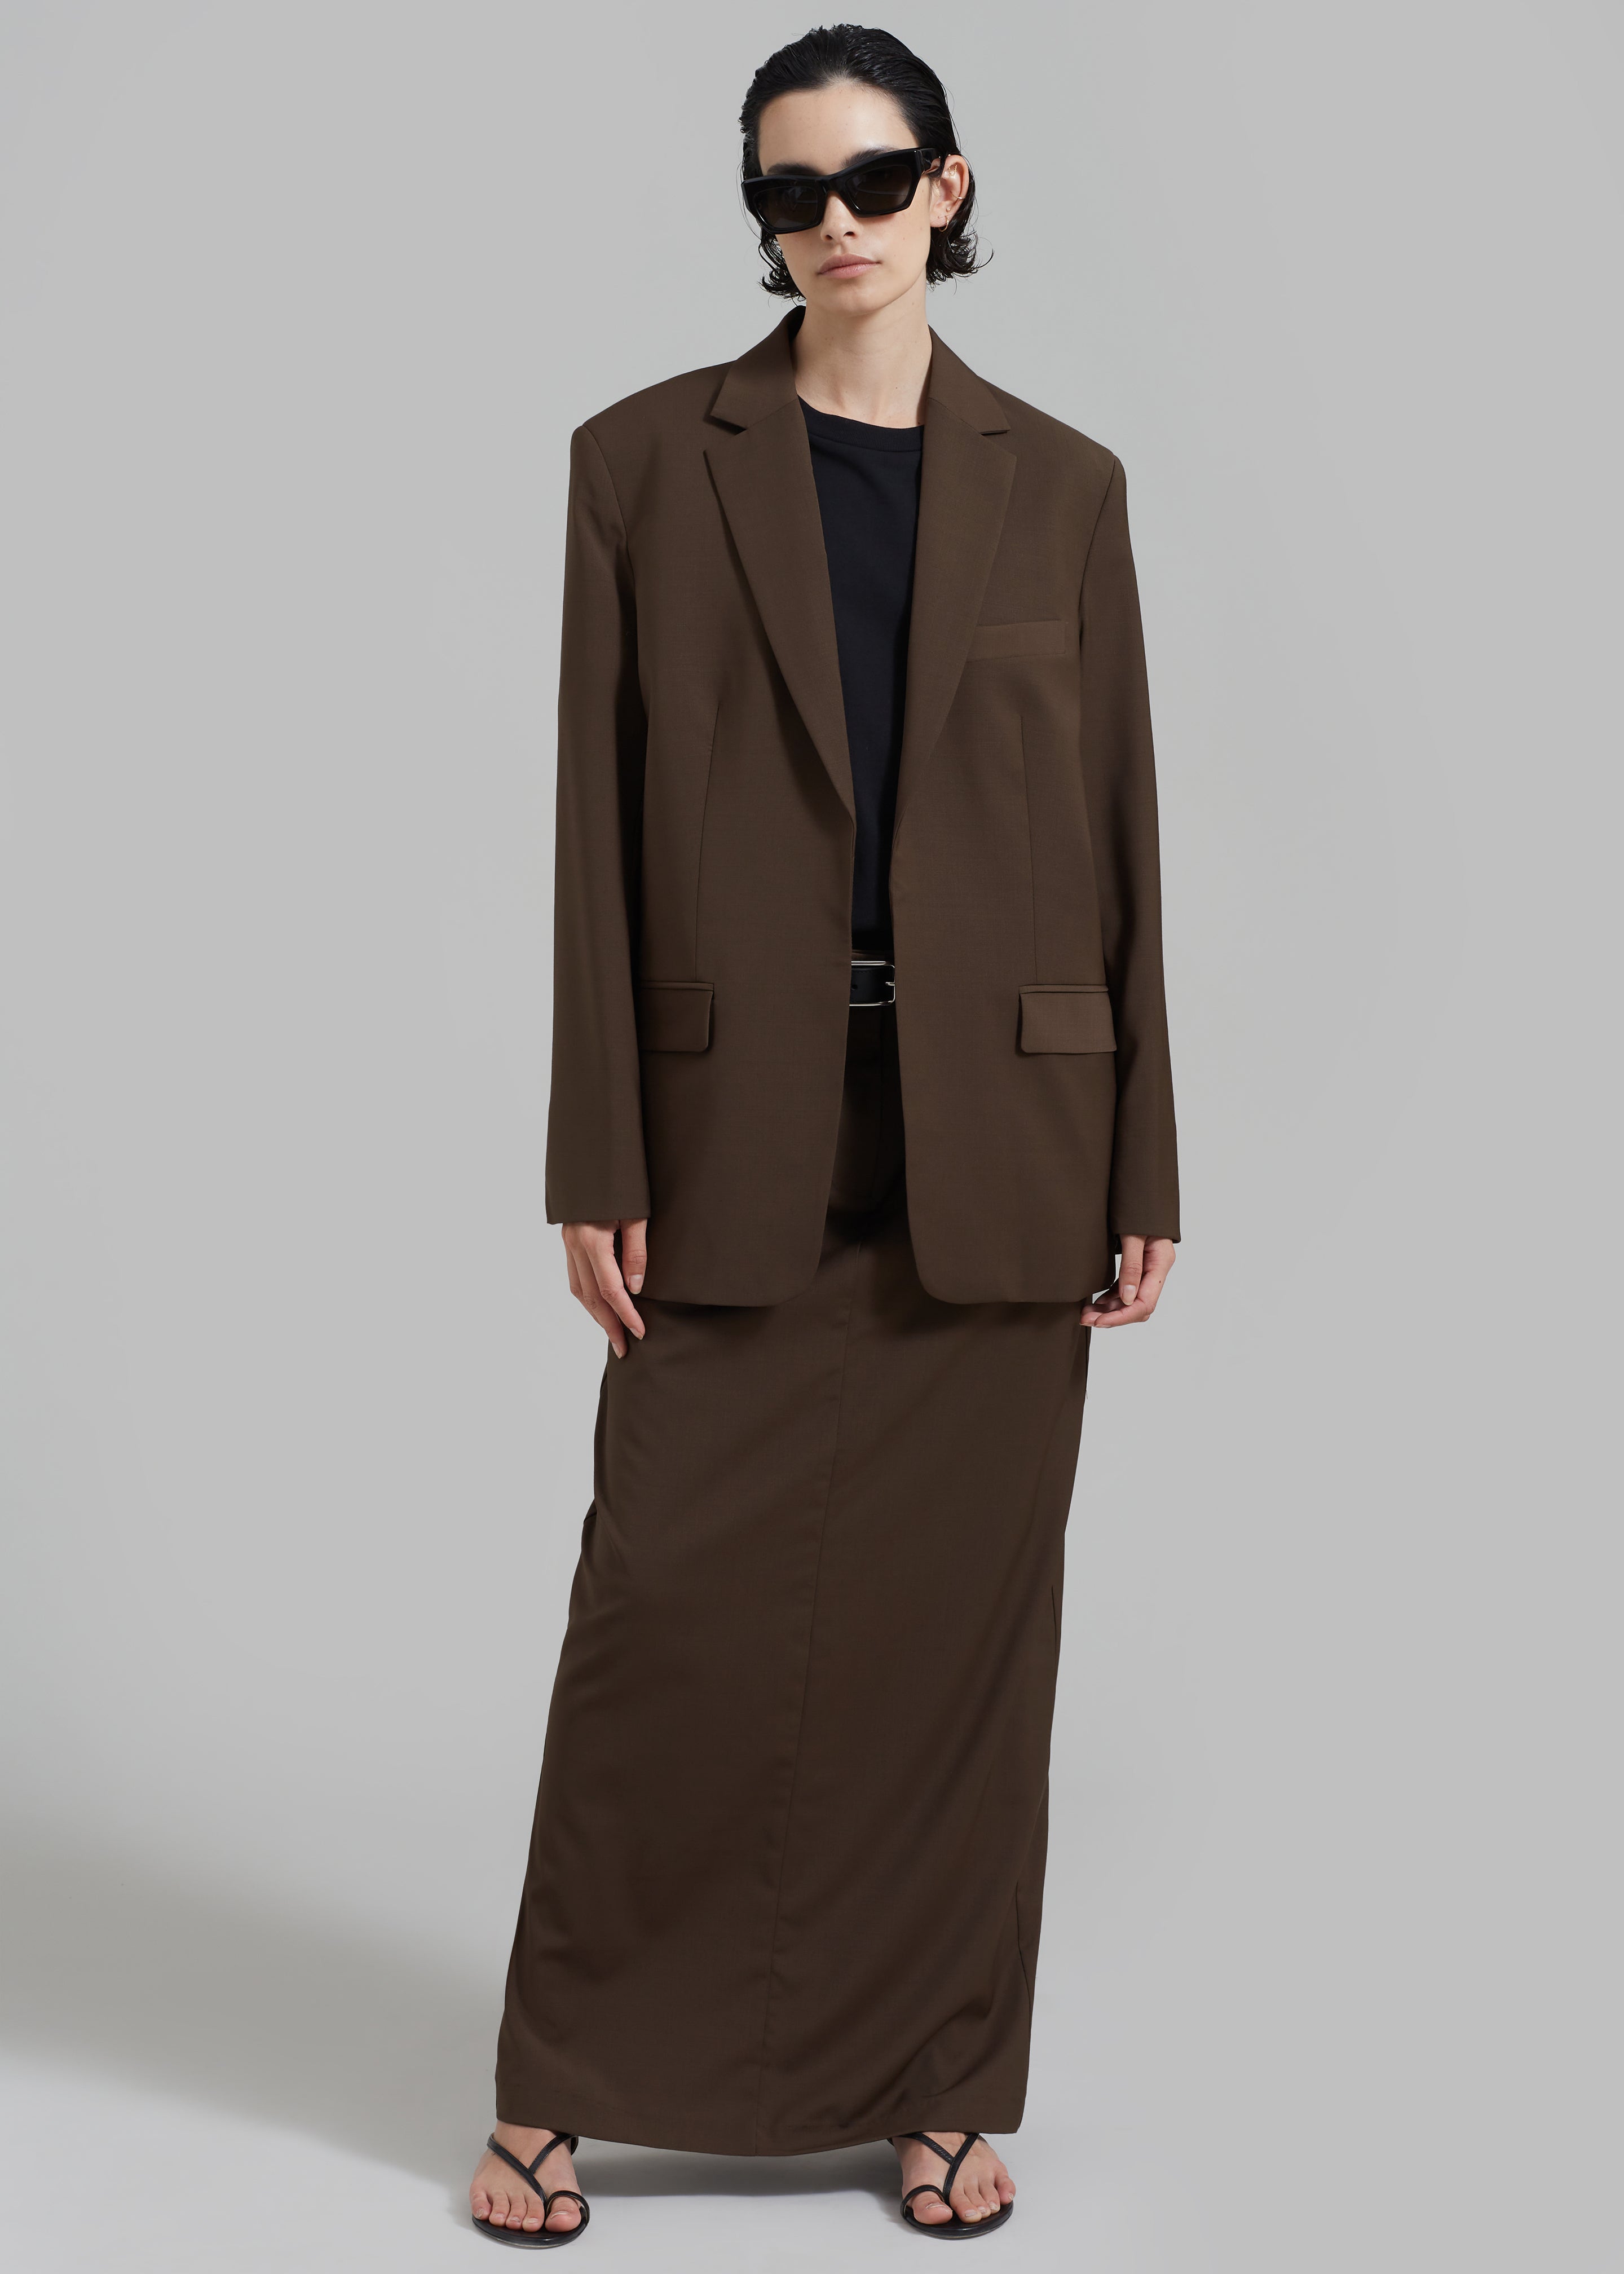 Matteau Relaxed Tailored Blazer - Coffee - 2